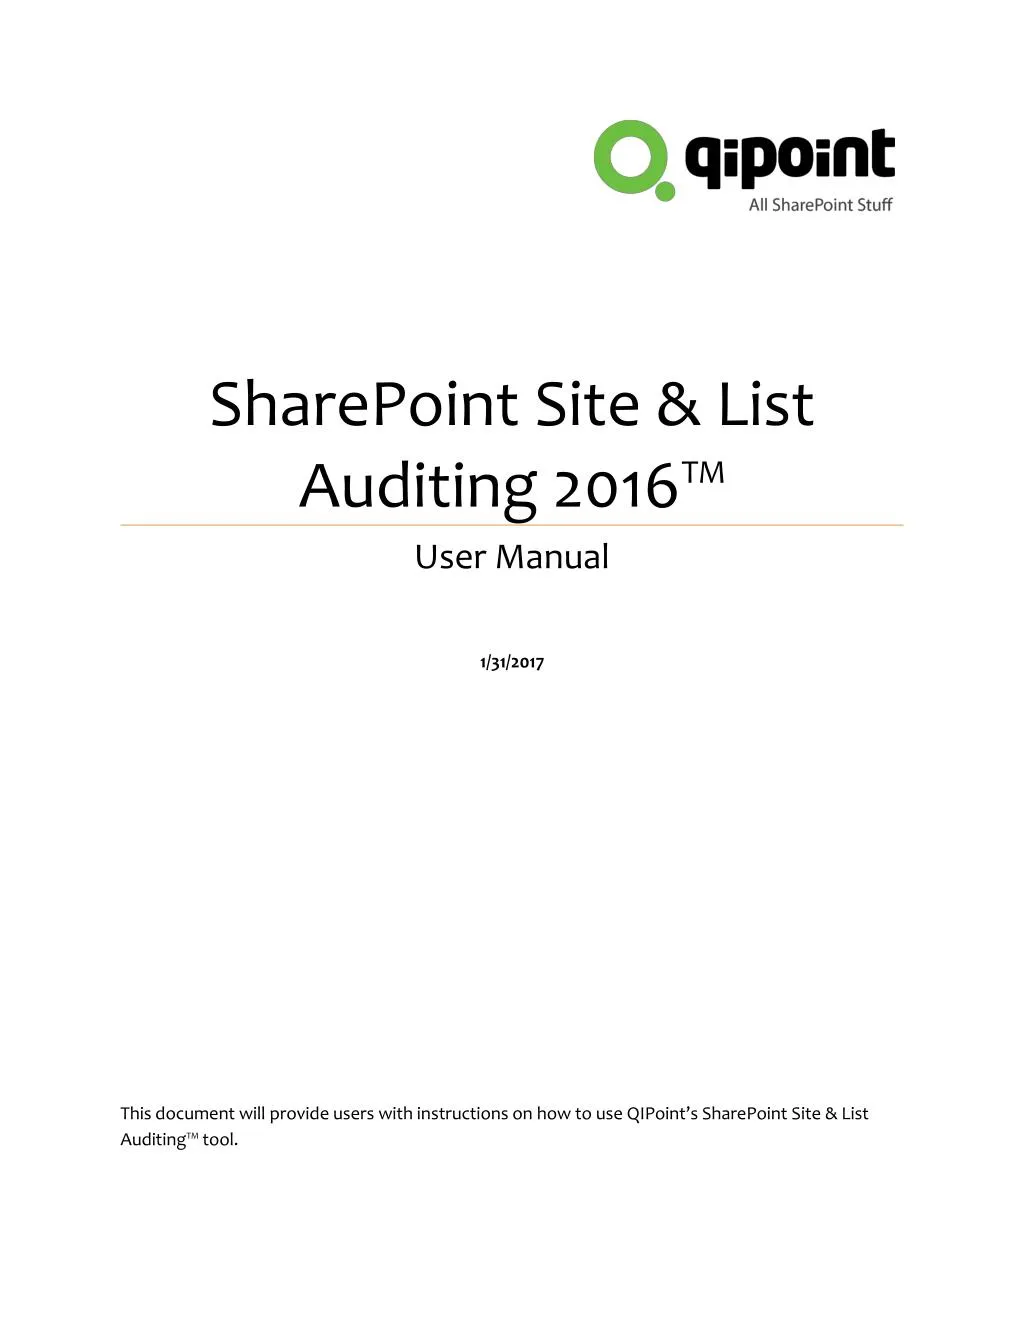 sharepoint site list auditing 2016 user manual